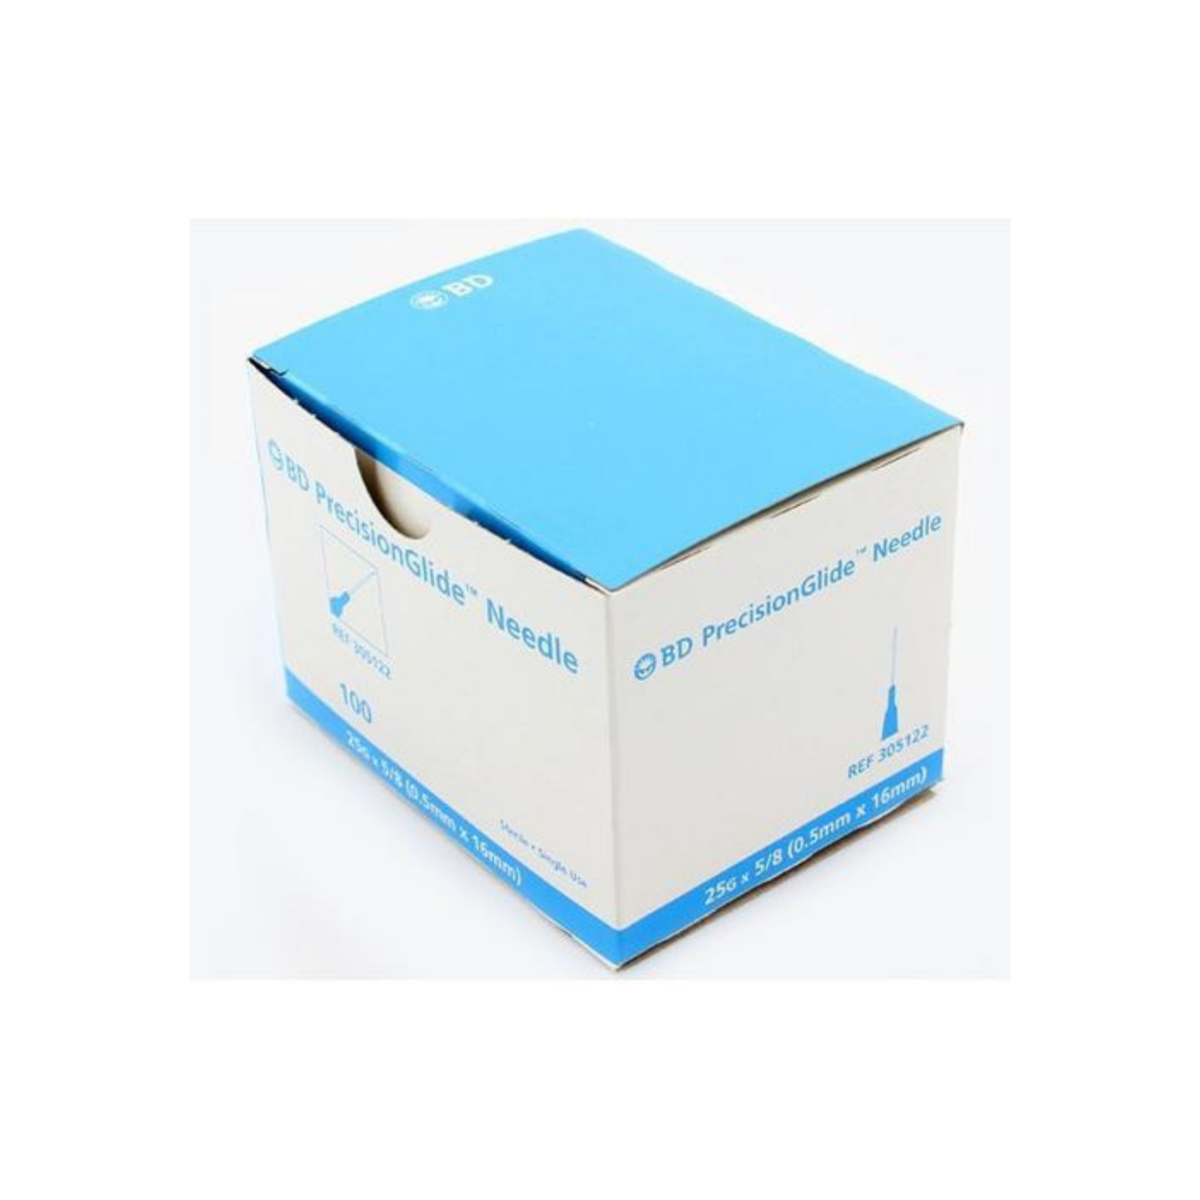 A blue box with BD PrecisionGlide Hypodermic Needles 25G x 5/8" (50 Pack) inside, featuring a blue lid, from MedNeedles/MedPlus.